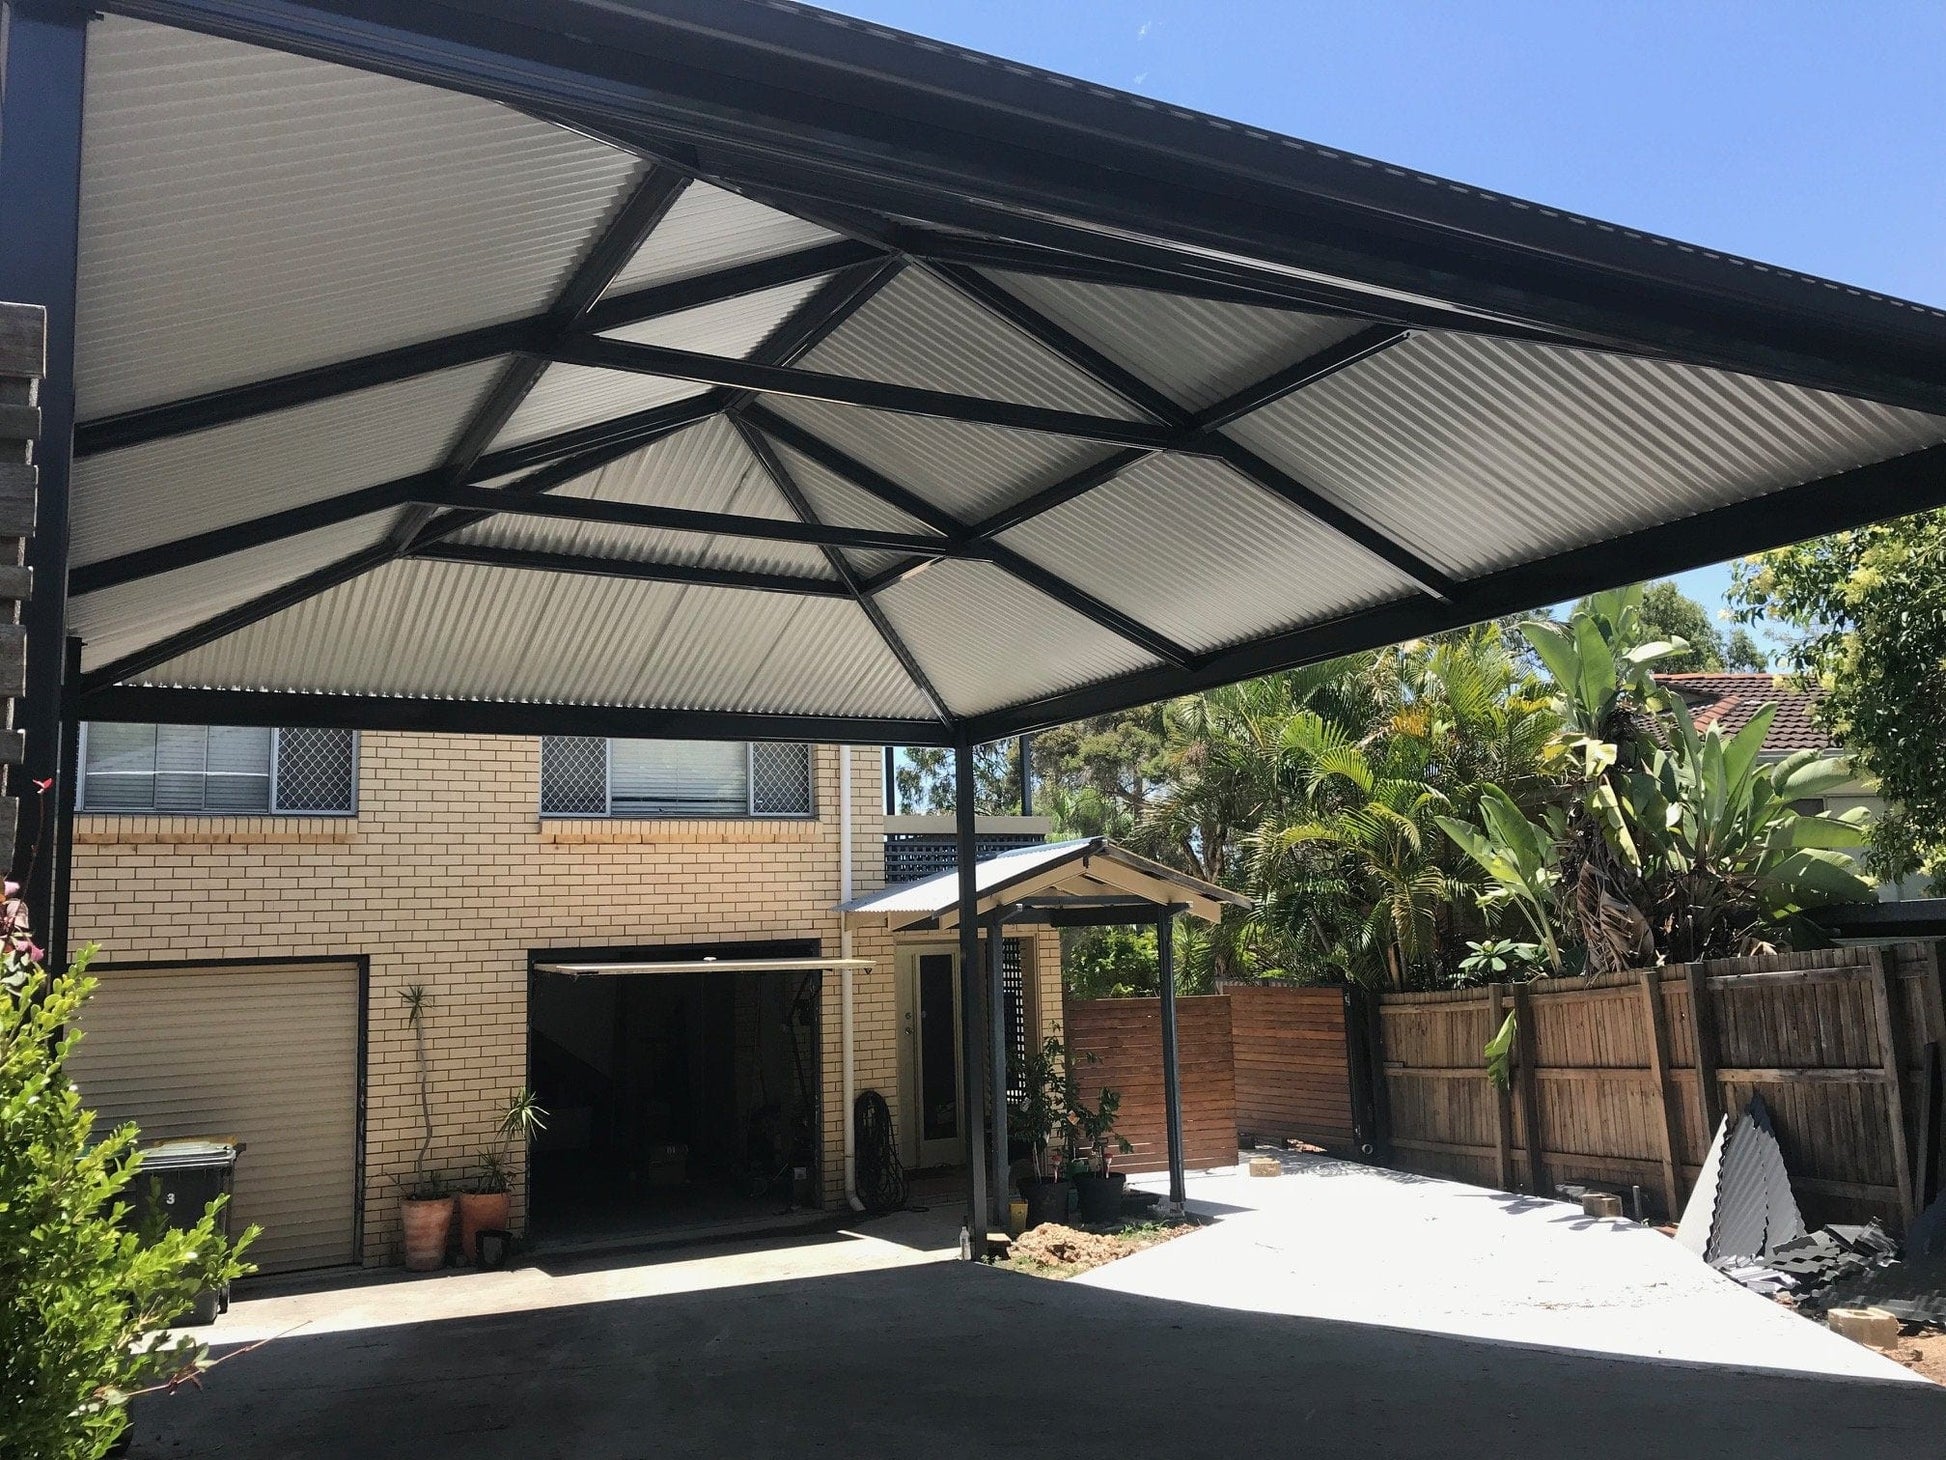 Insulated Gable Patio - 10m x 4m - Supply & Install QHI National